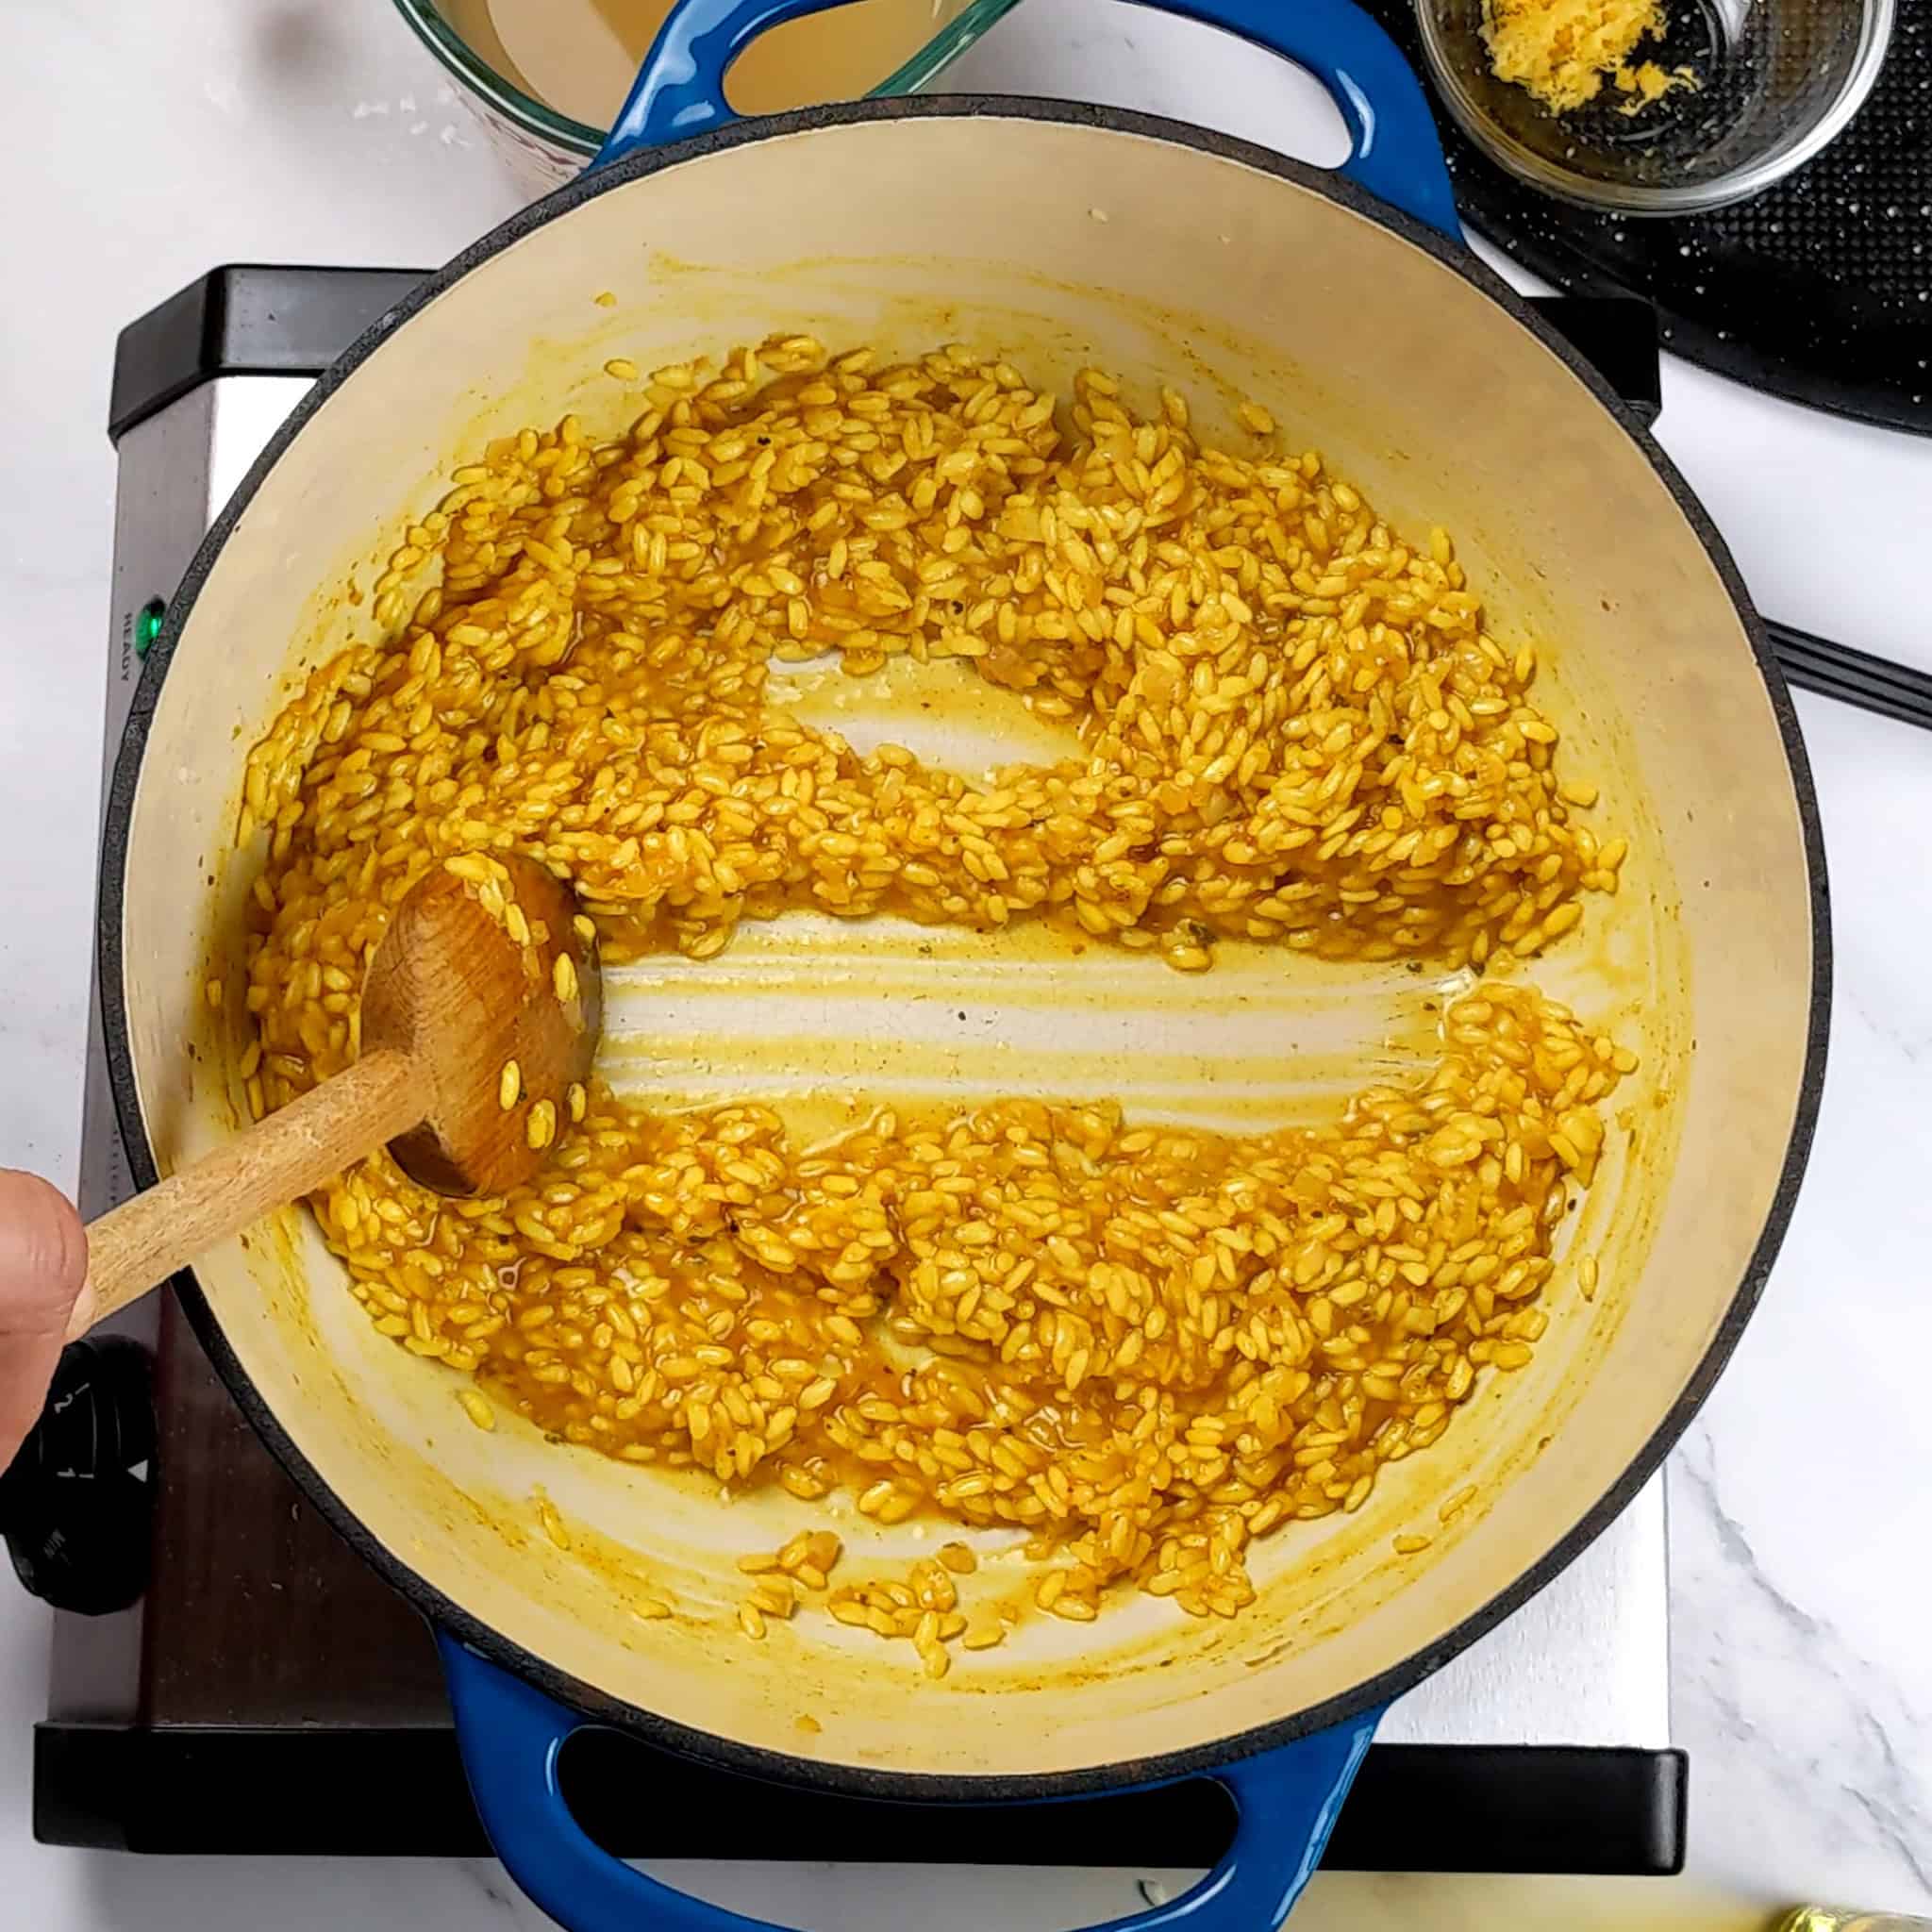 the chicken broth absorbed puffed up yellow arborio rice split into two with a wooden spoon in lodge dutch oven.